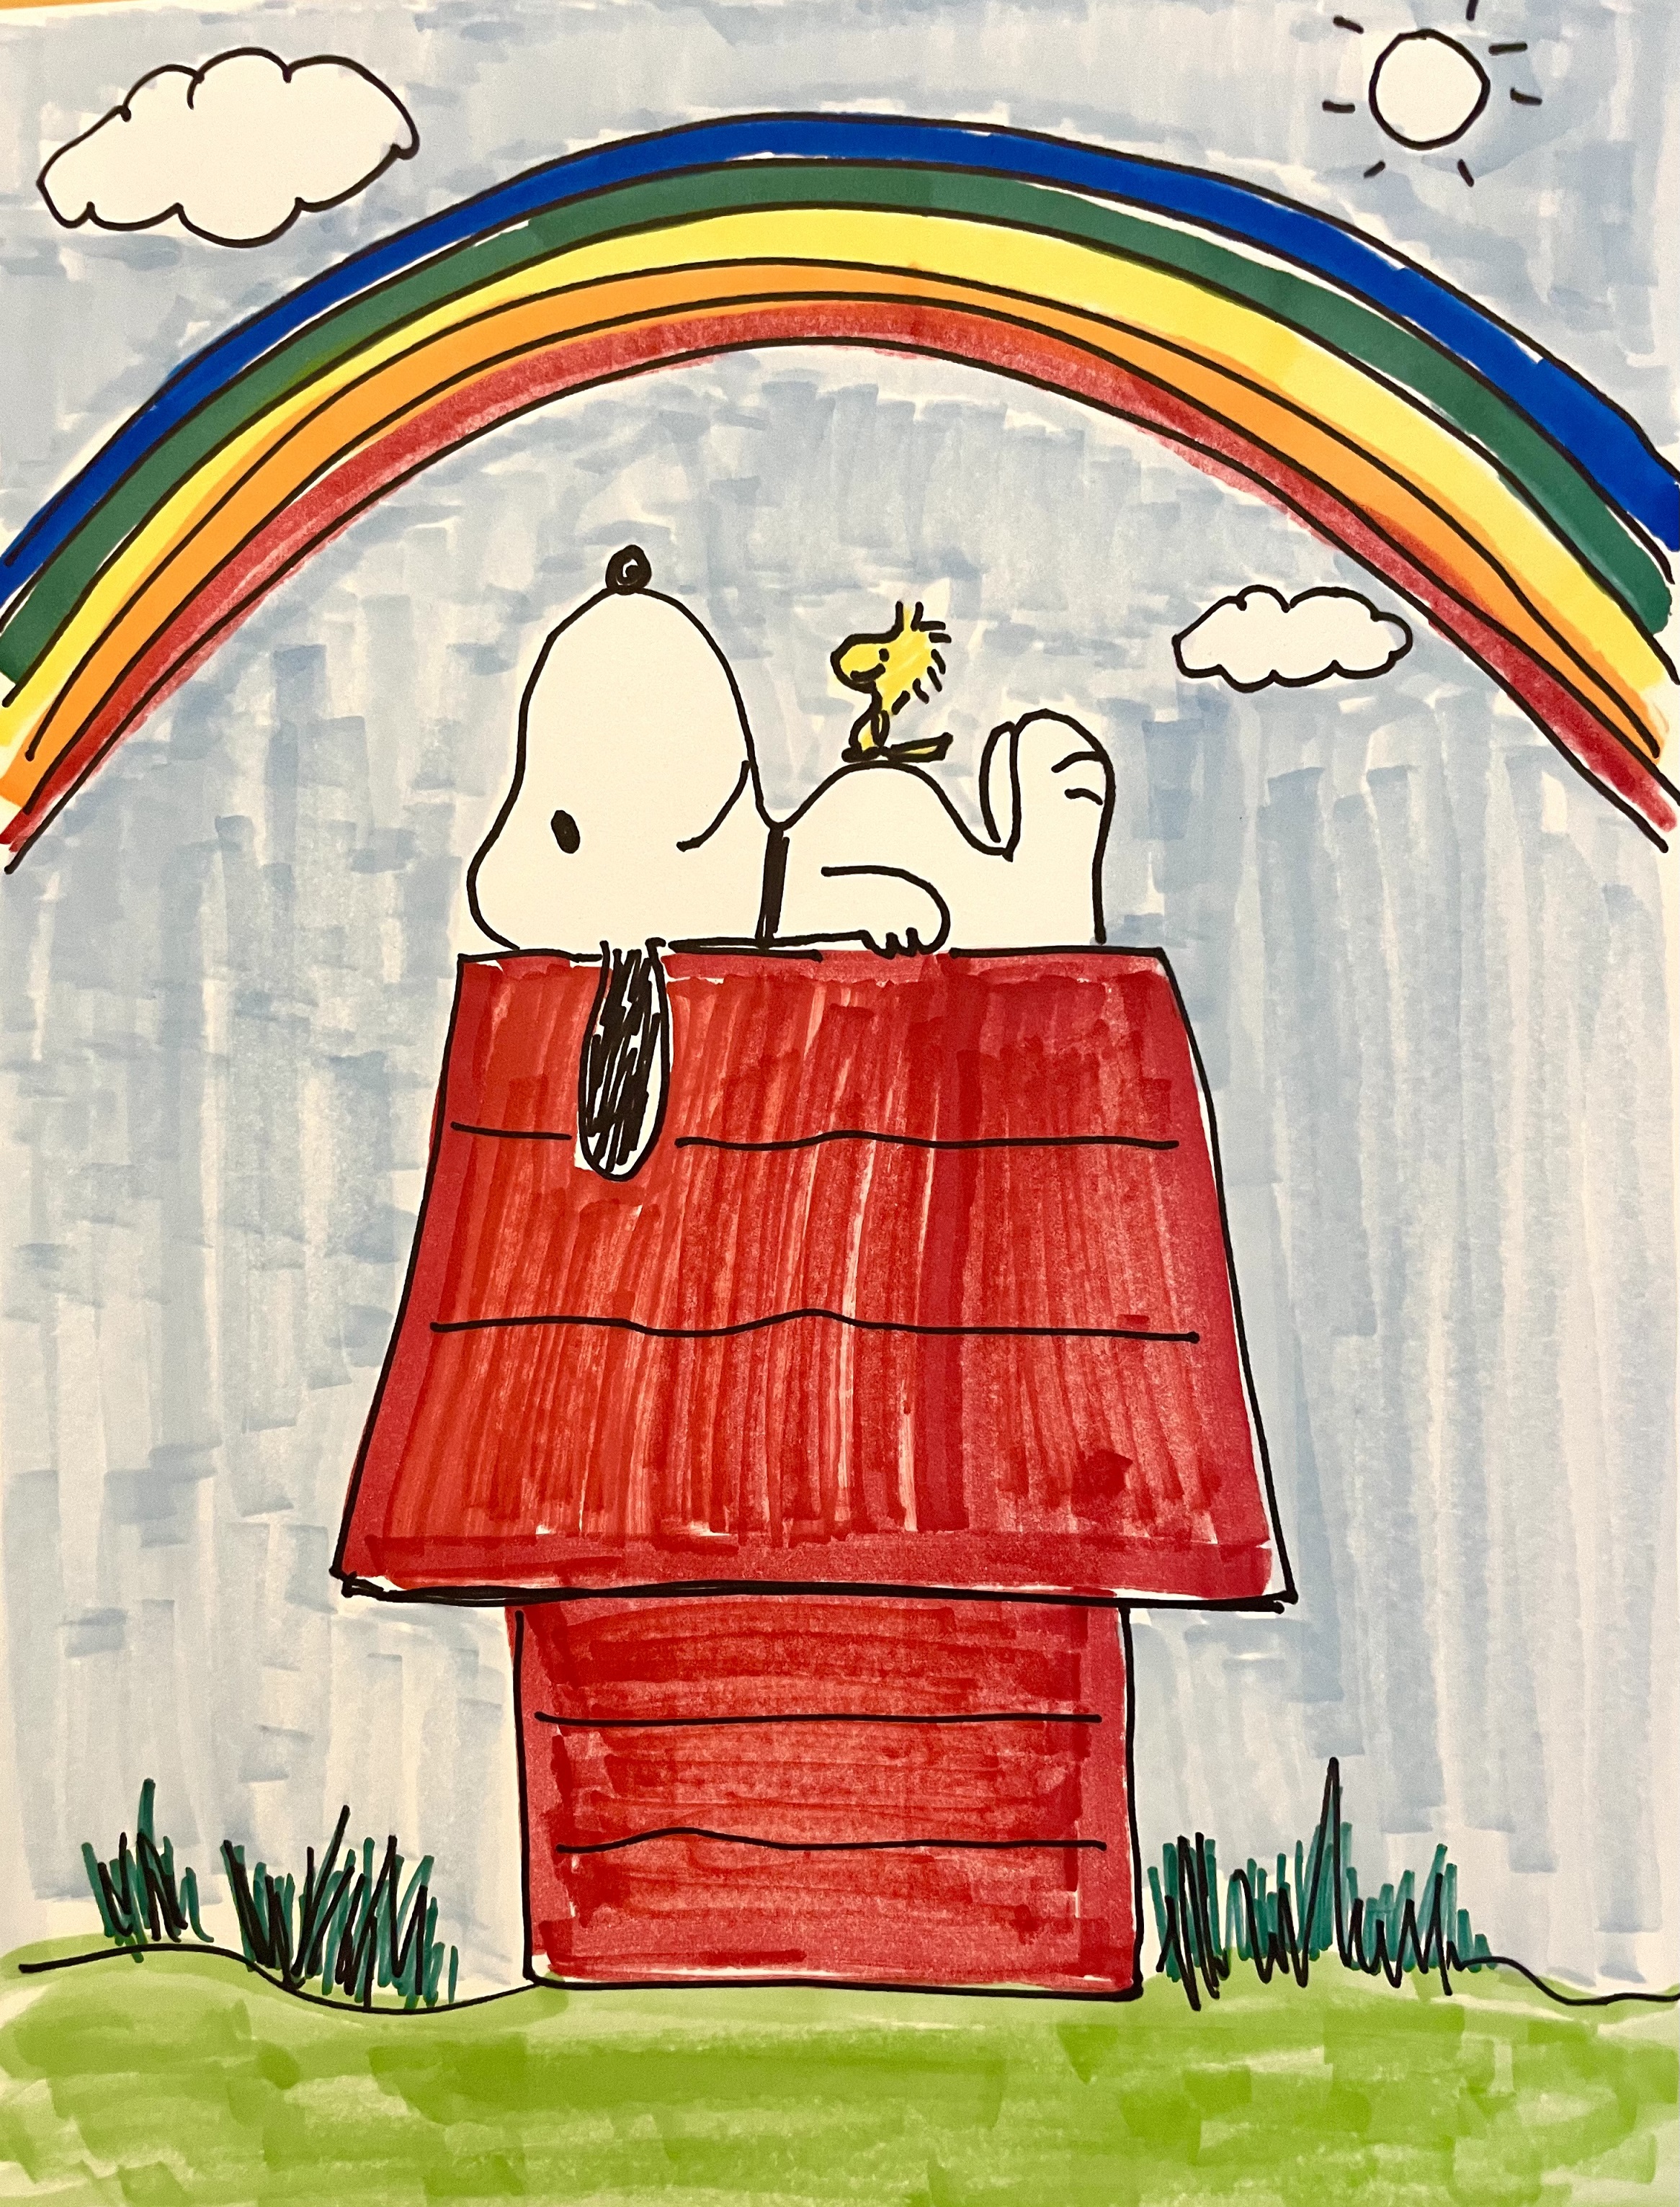 Snoopy on his red doghouse